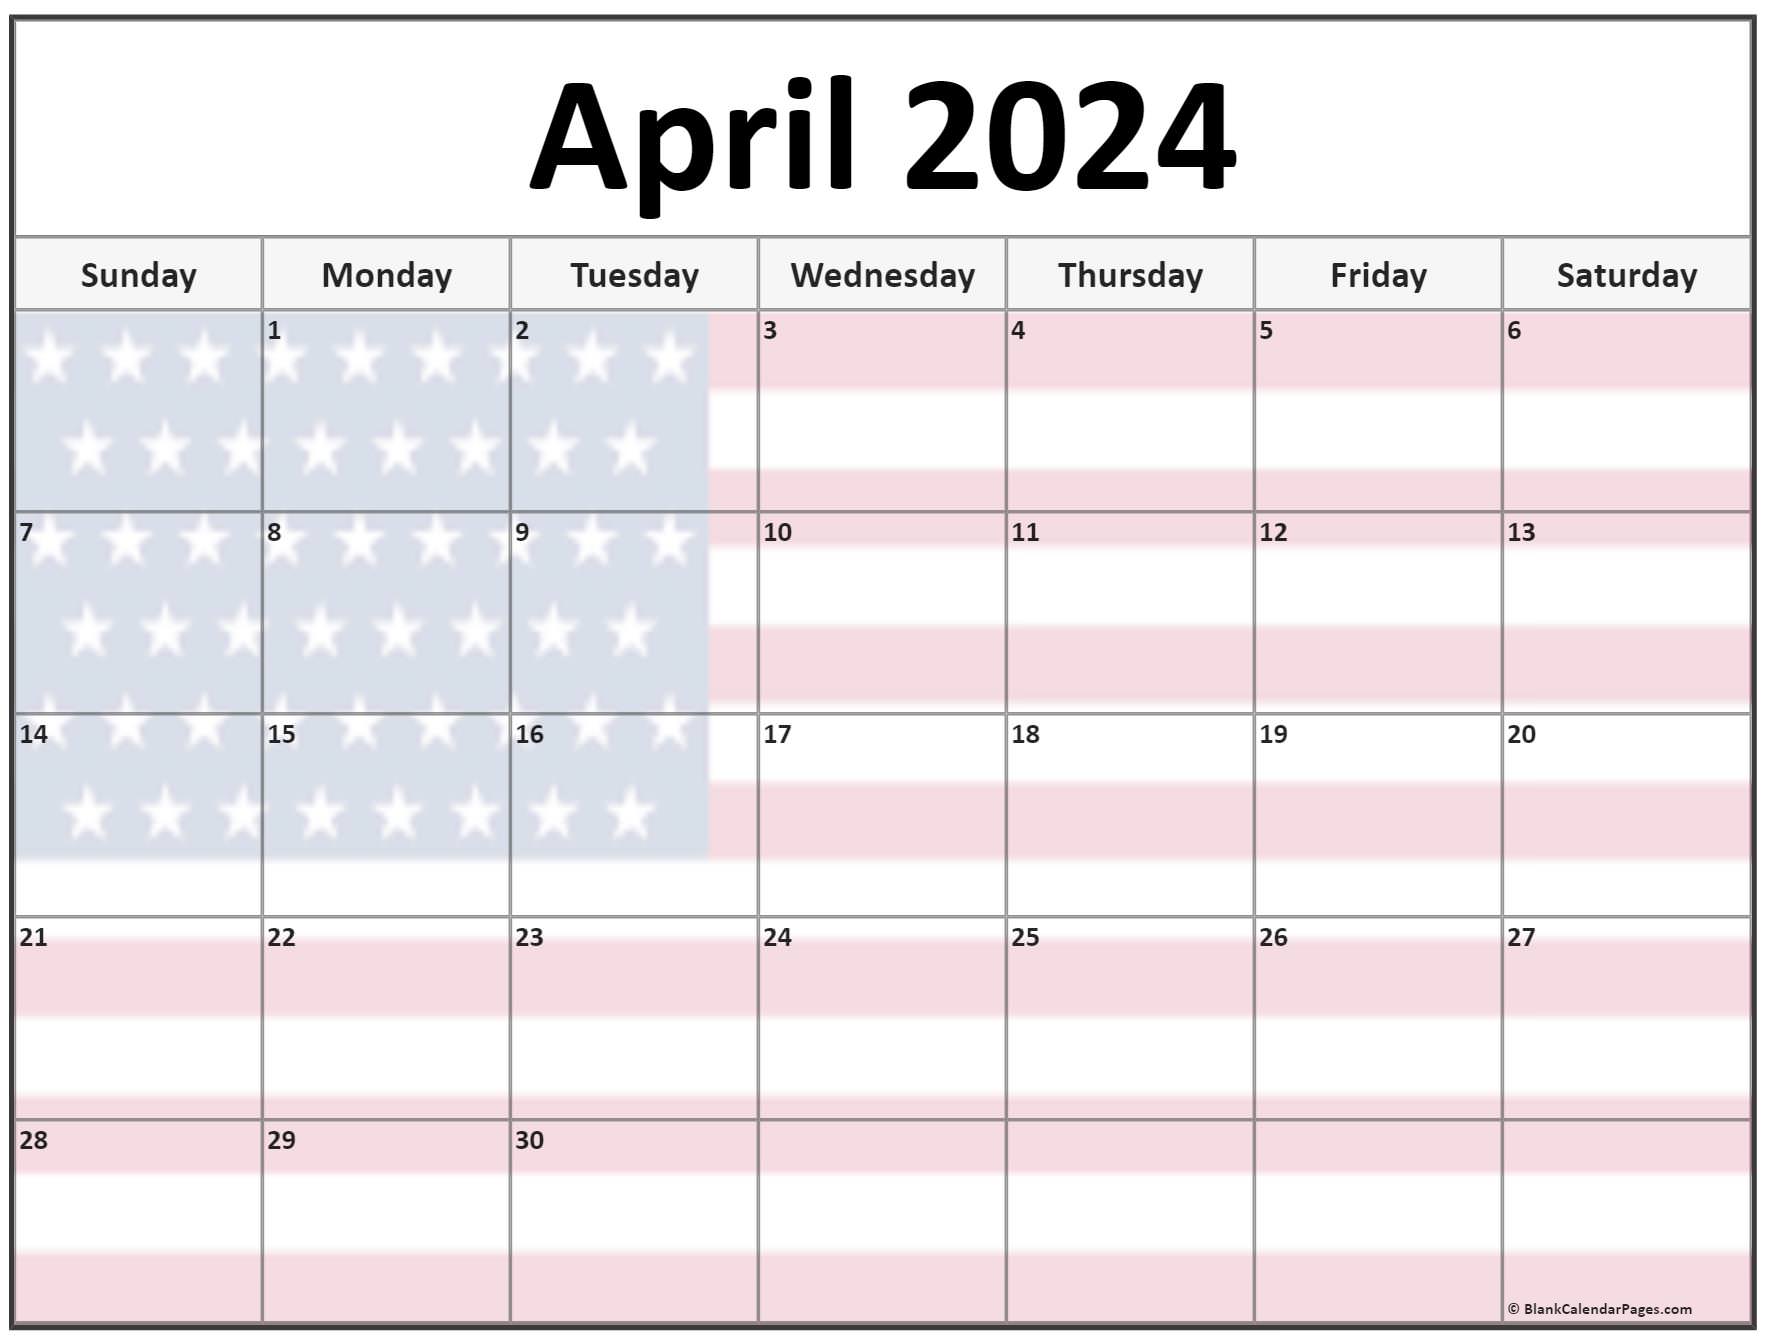 Collection of April 2024 photo calendars with image filters.